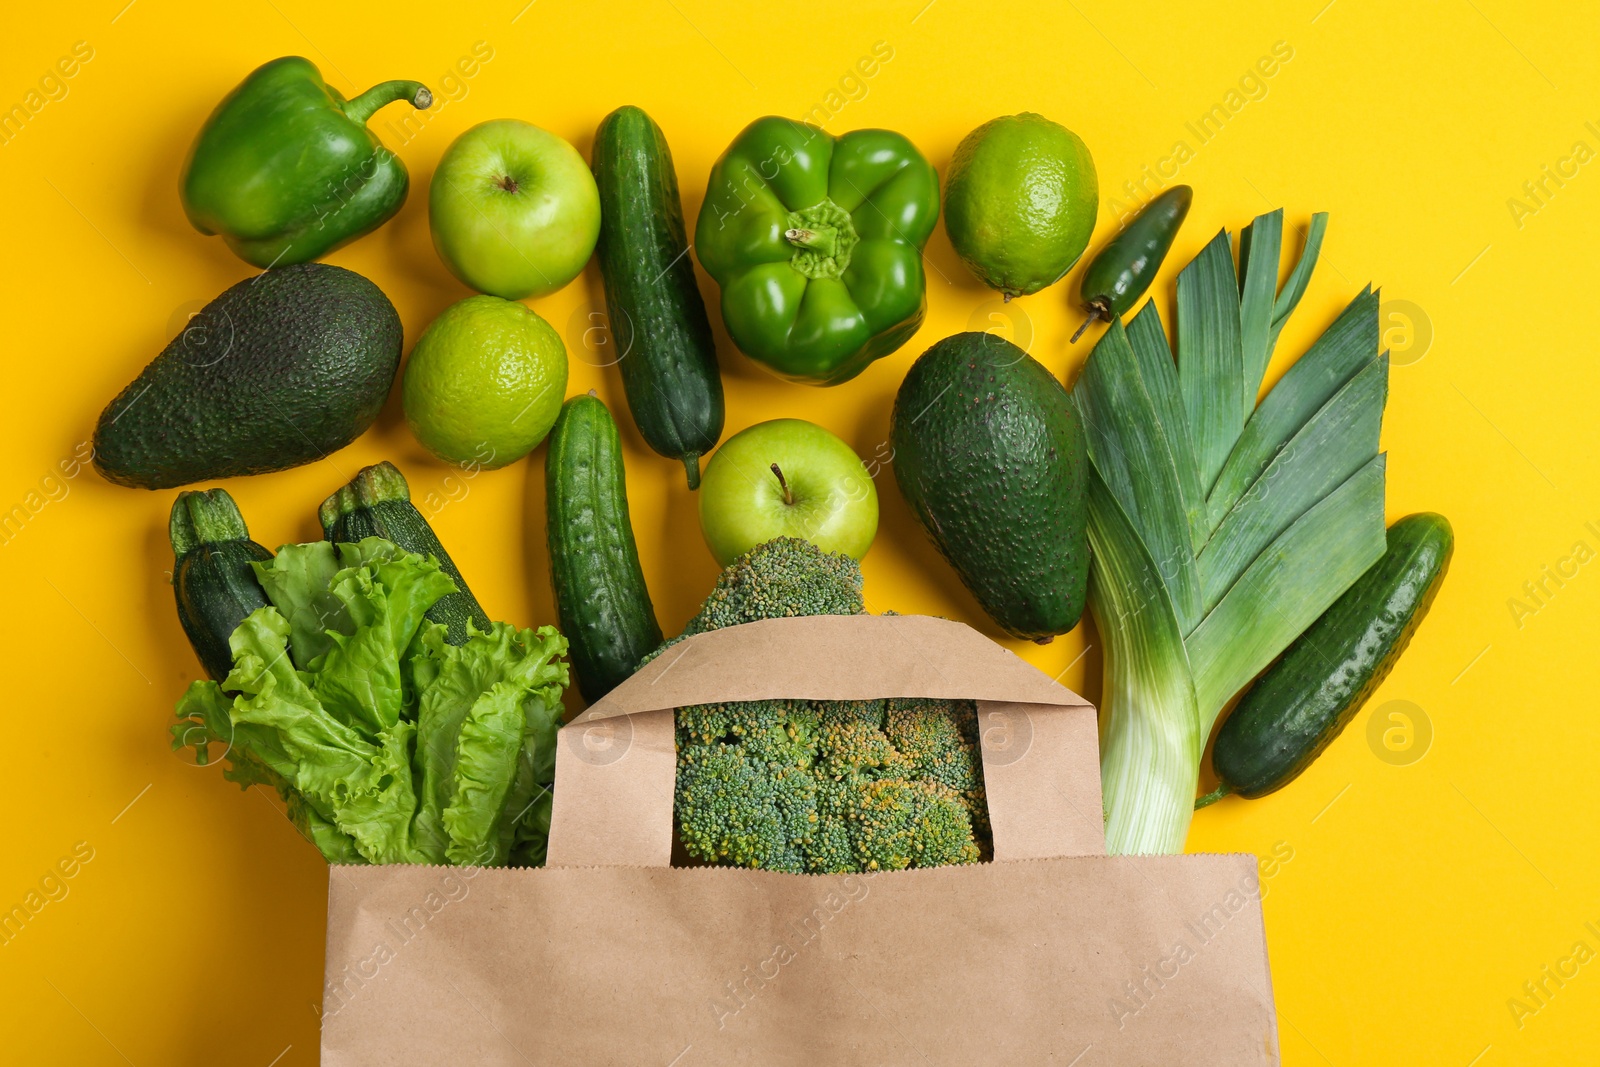 Photo of Paper bag with different groceries on yellow background, flat lay